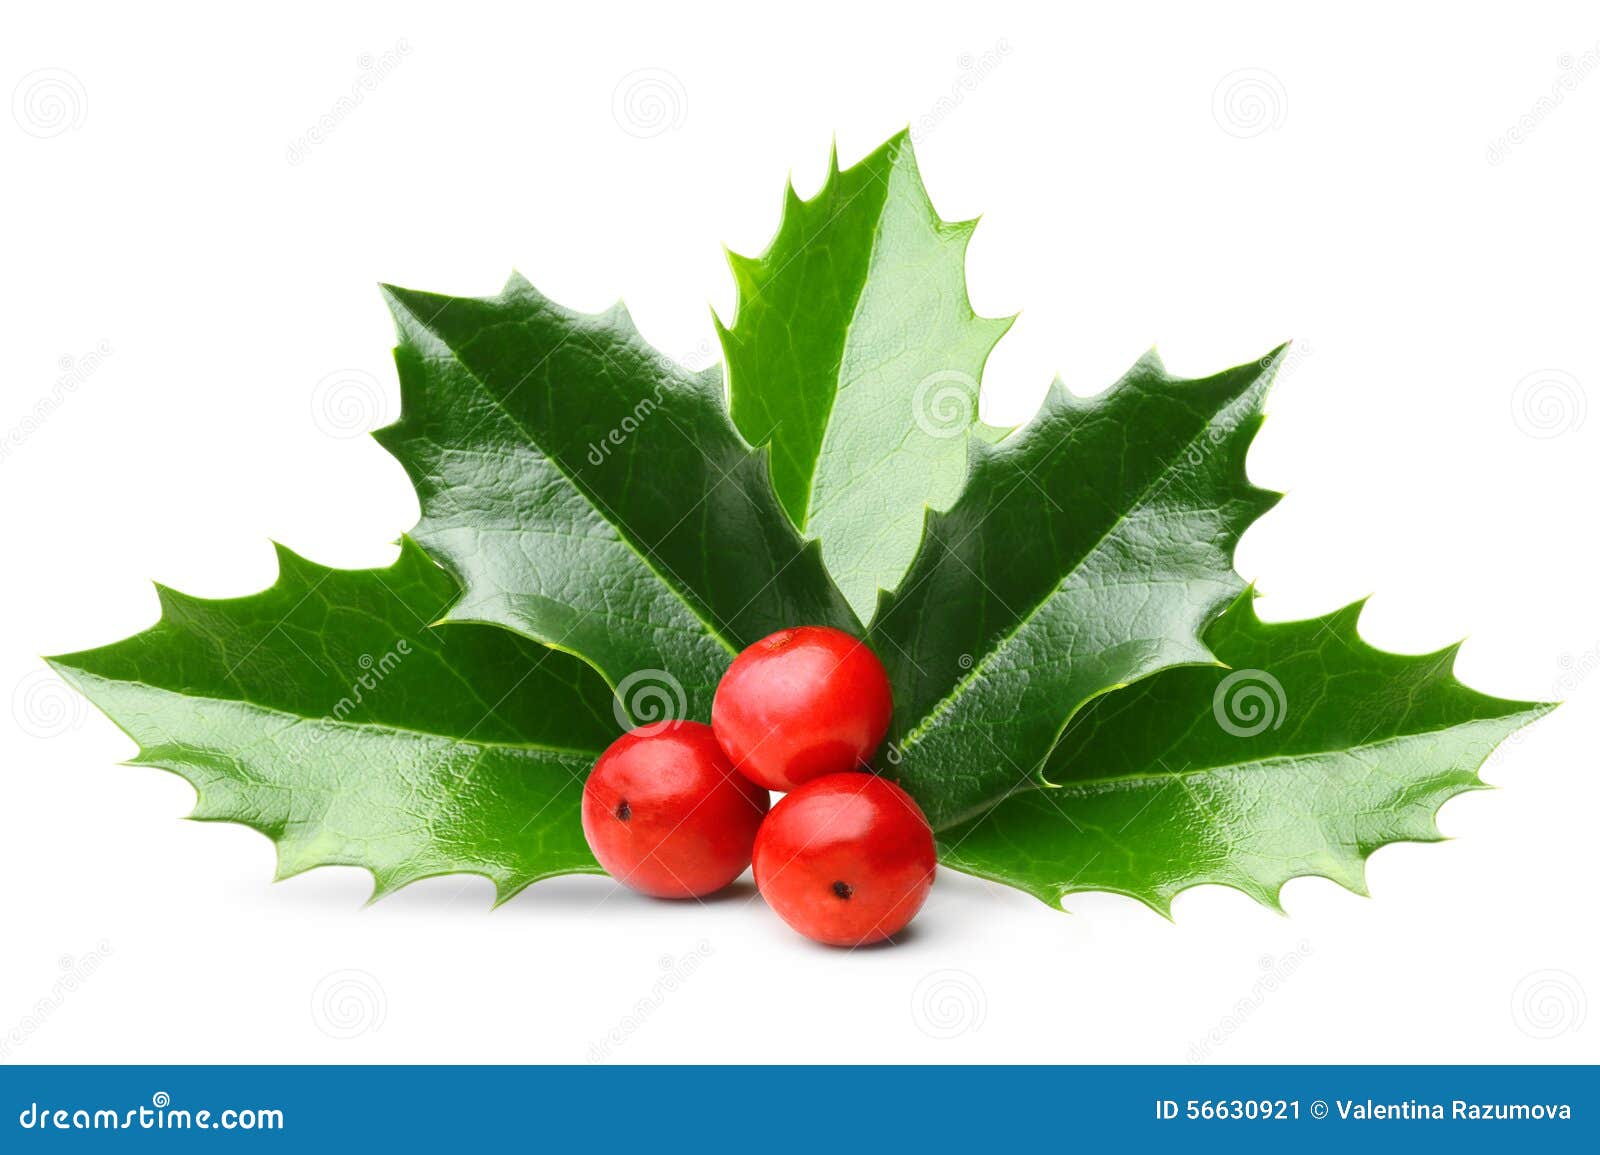 holly berry leaves 